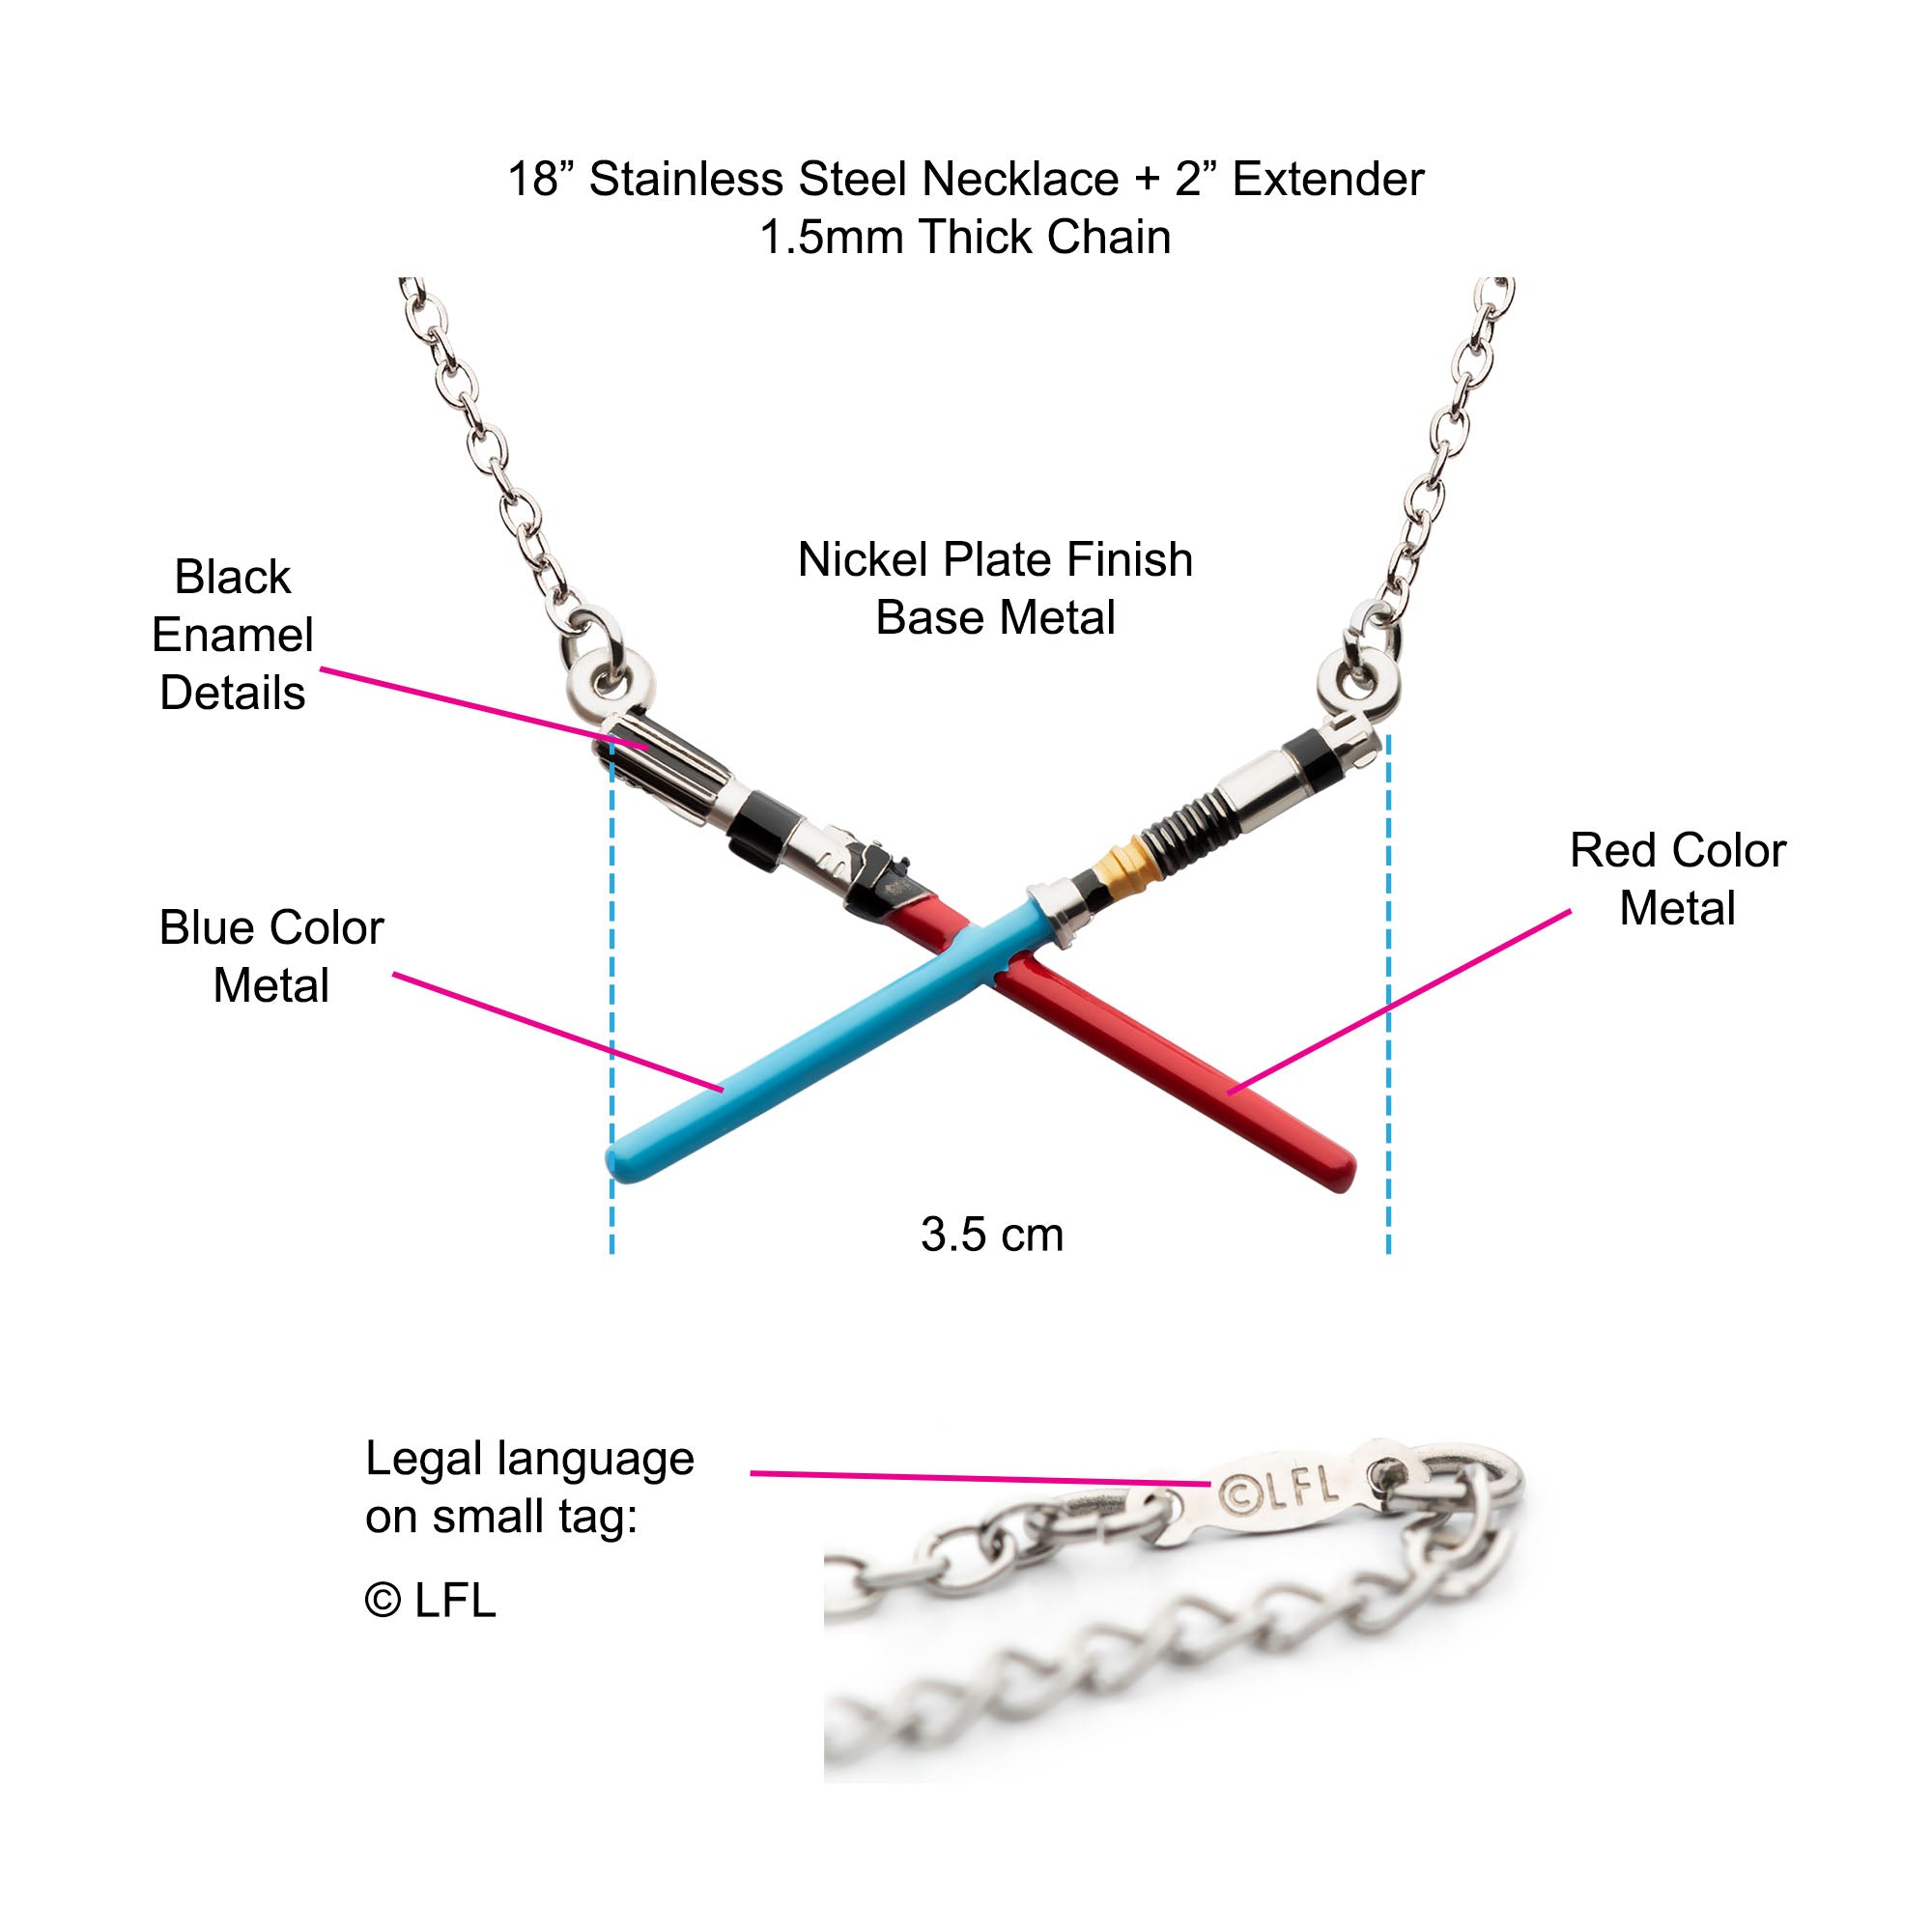 Star Wars Book of Boba Fett Crossed Lightsaber Base Metal Necklace Set with Steel Chain